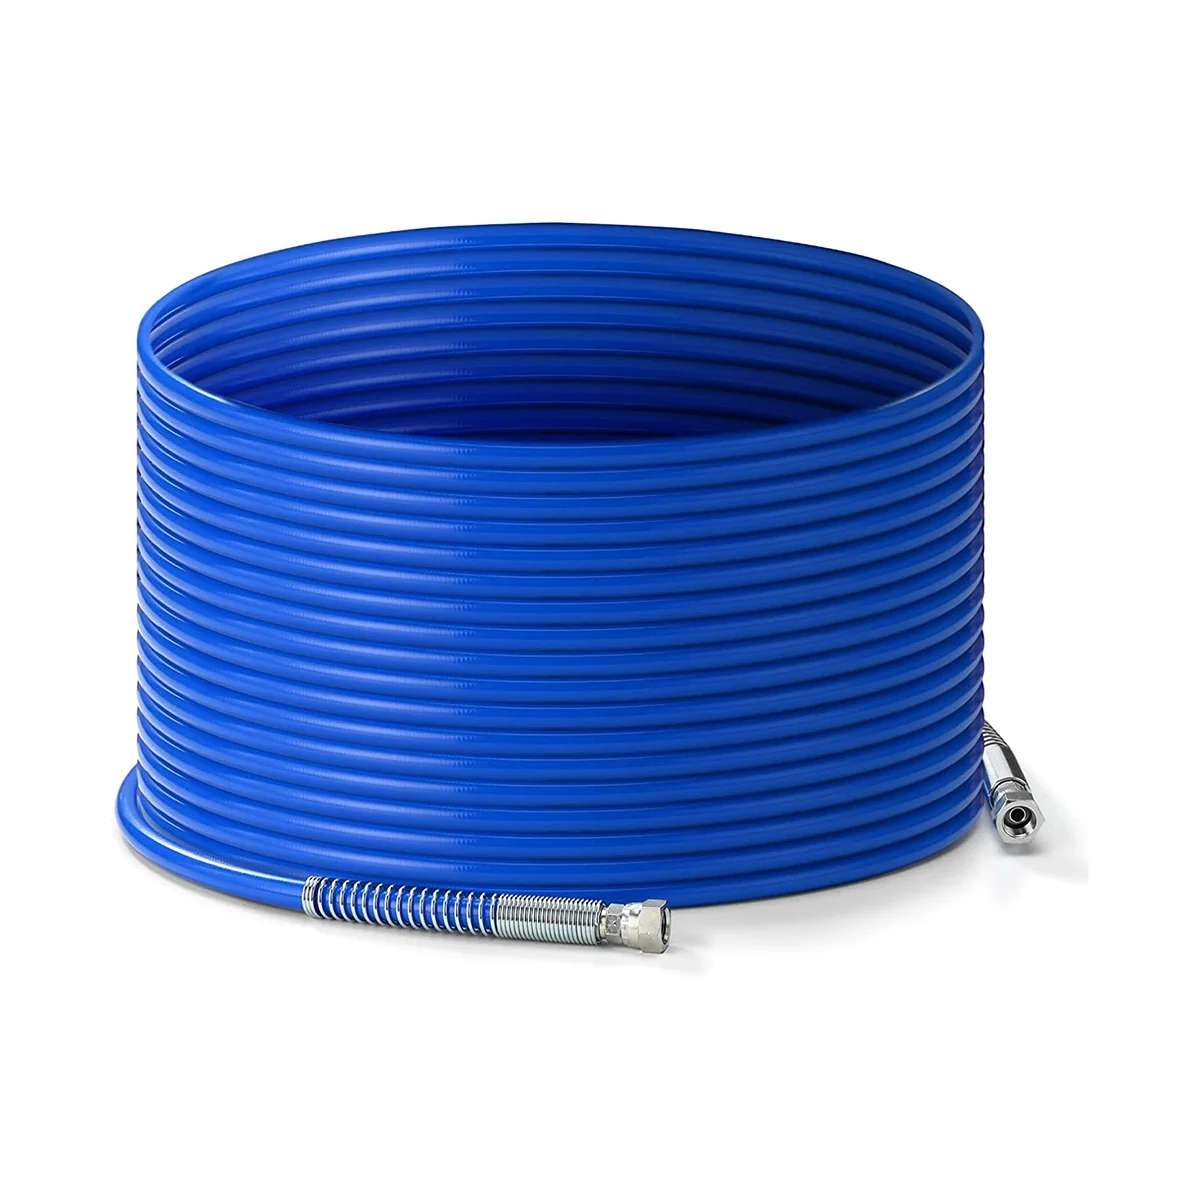 Airless Paint Sprayer Hose High Pressure Spray Paint Hose 50 FT x 1/4 inch 3300PSI Max W.P 3600